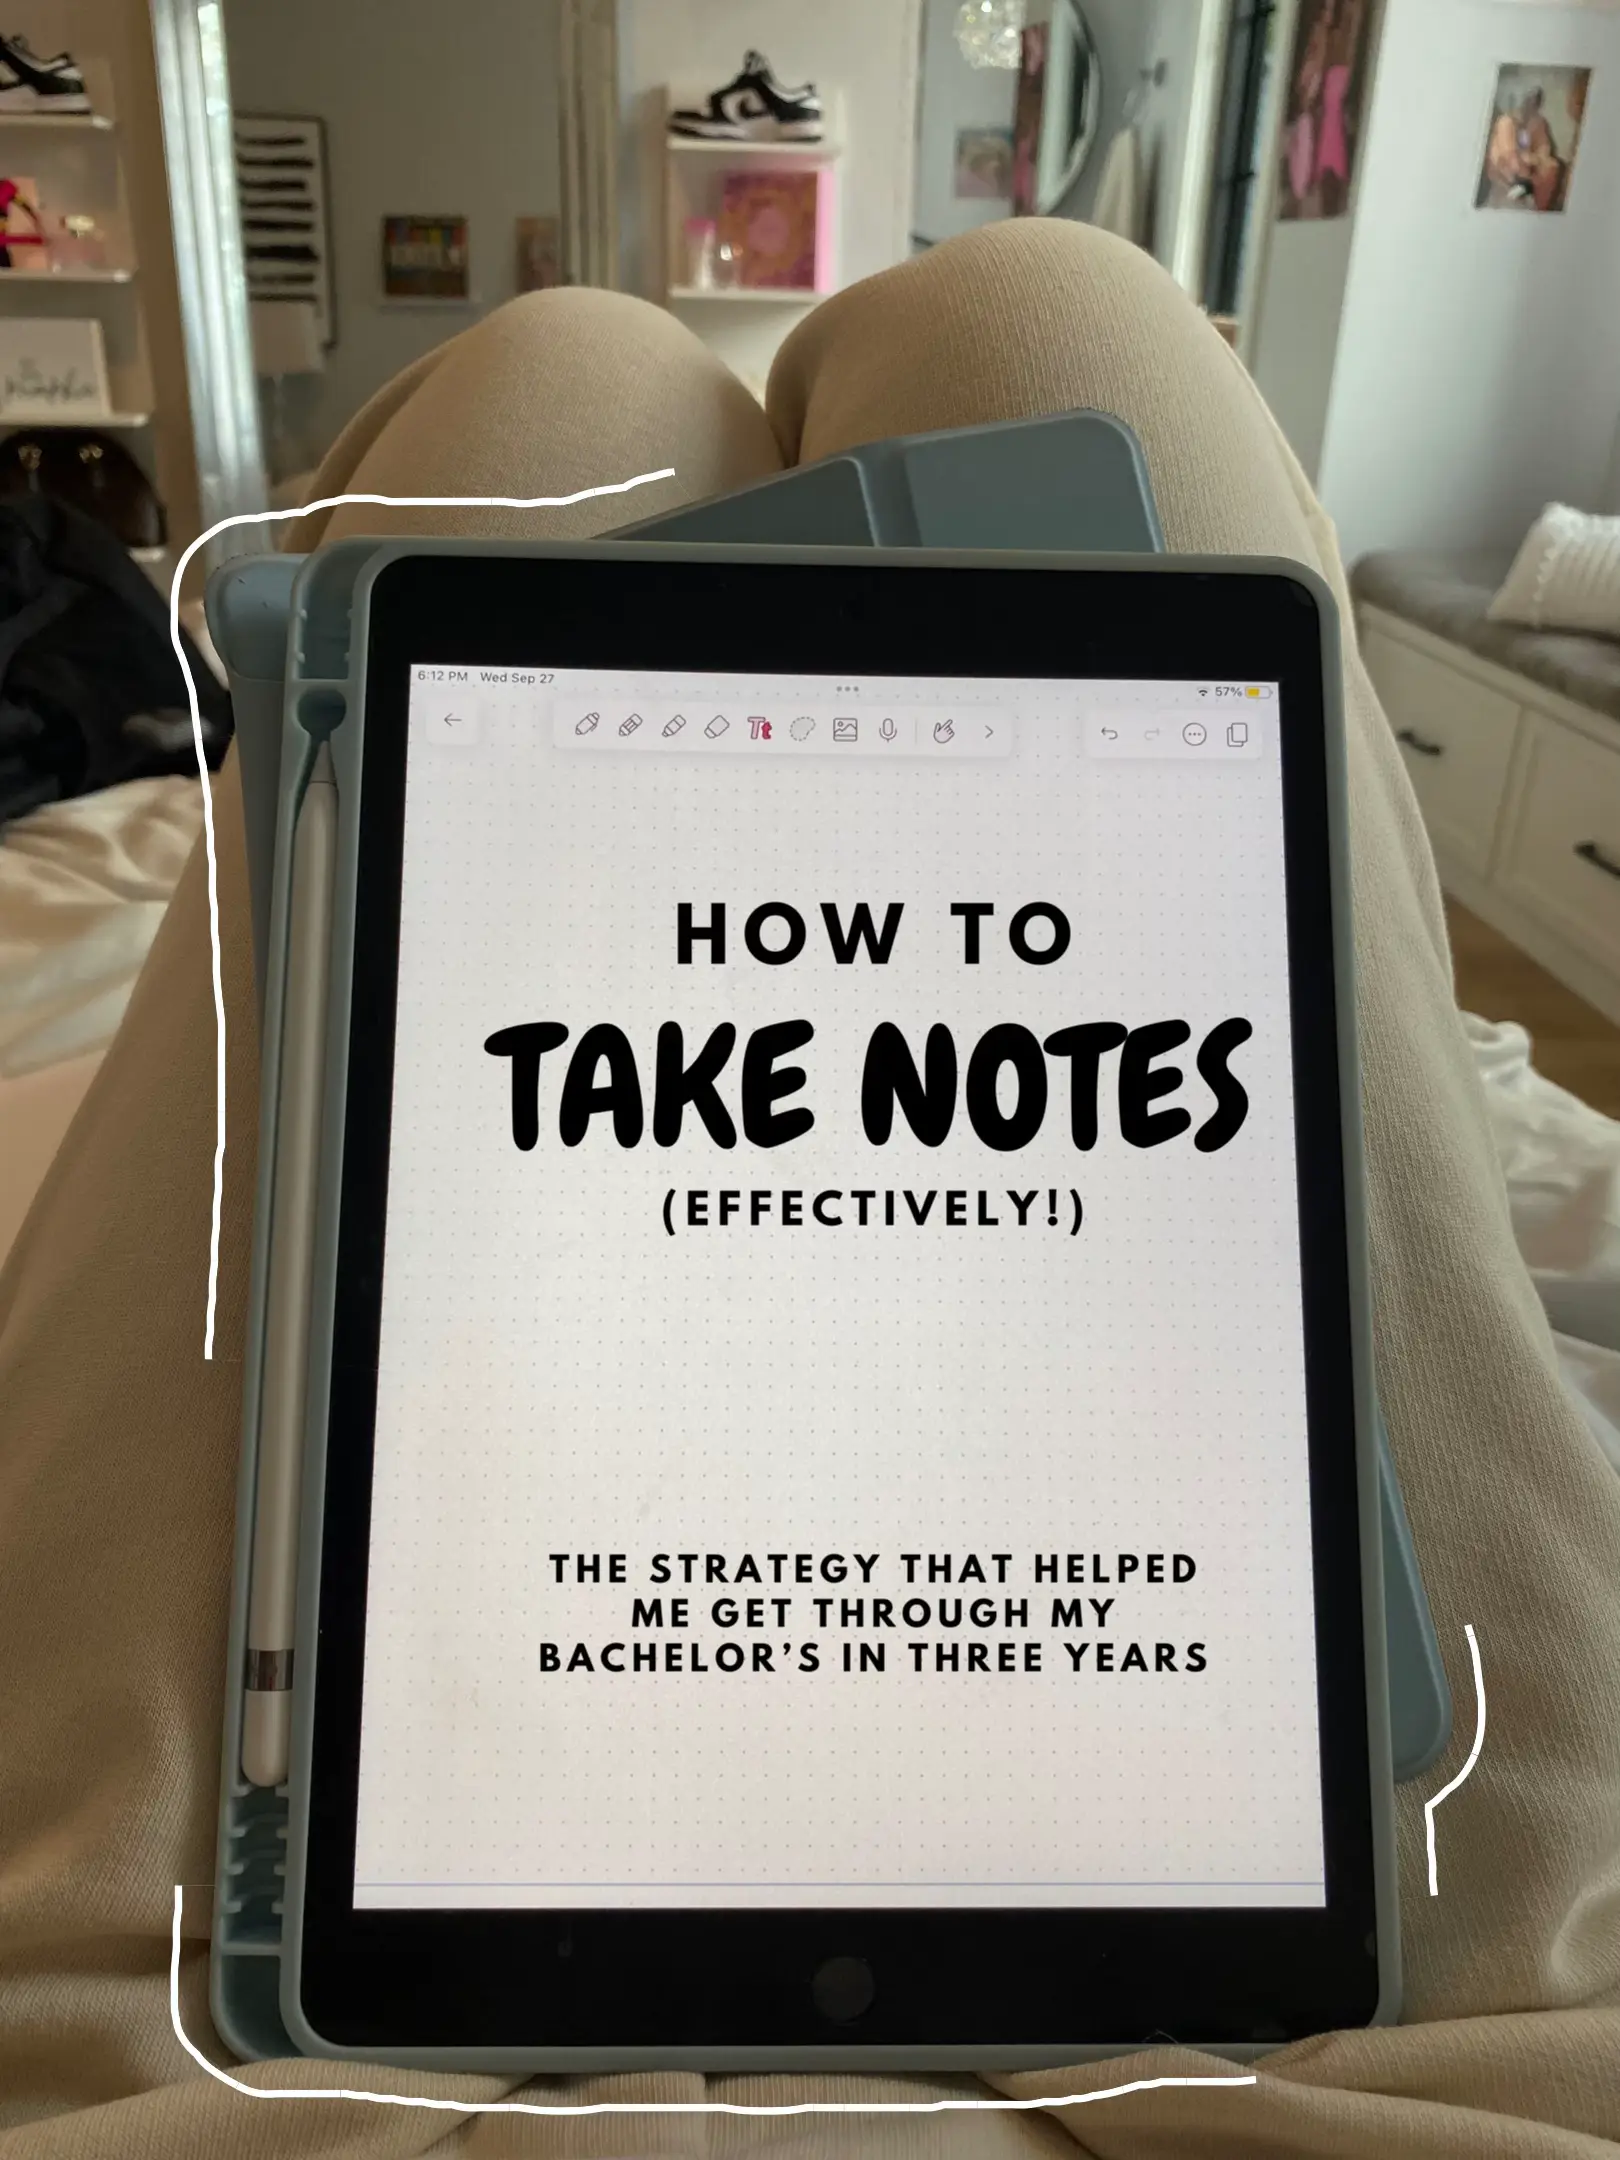 How to Take Effective Notes